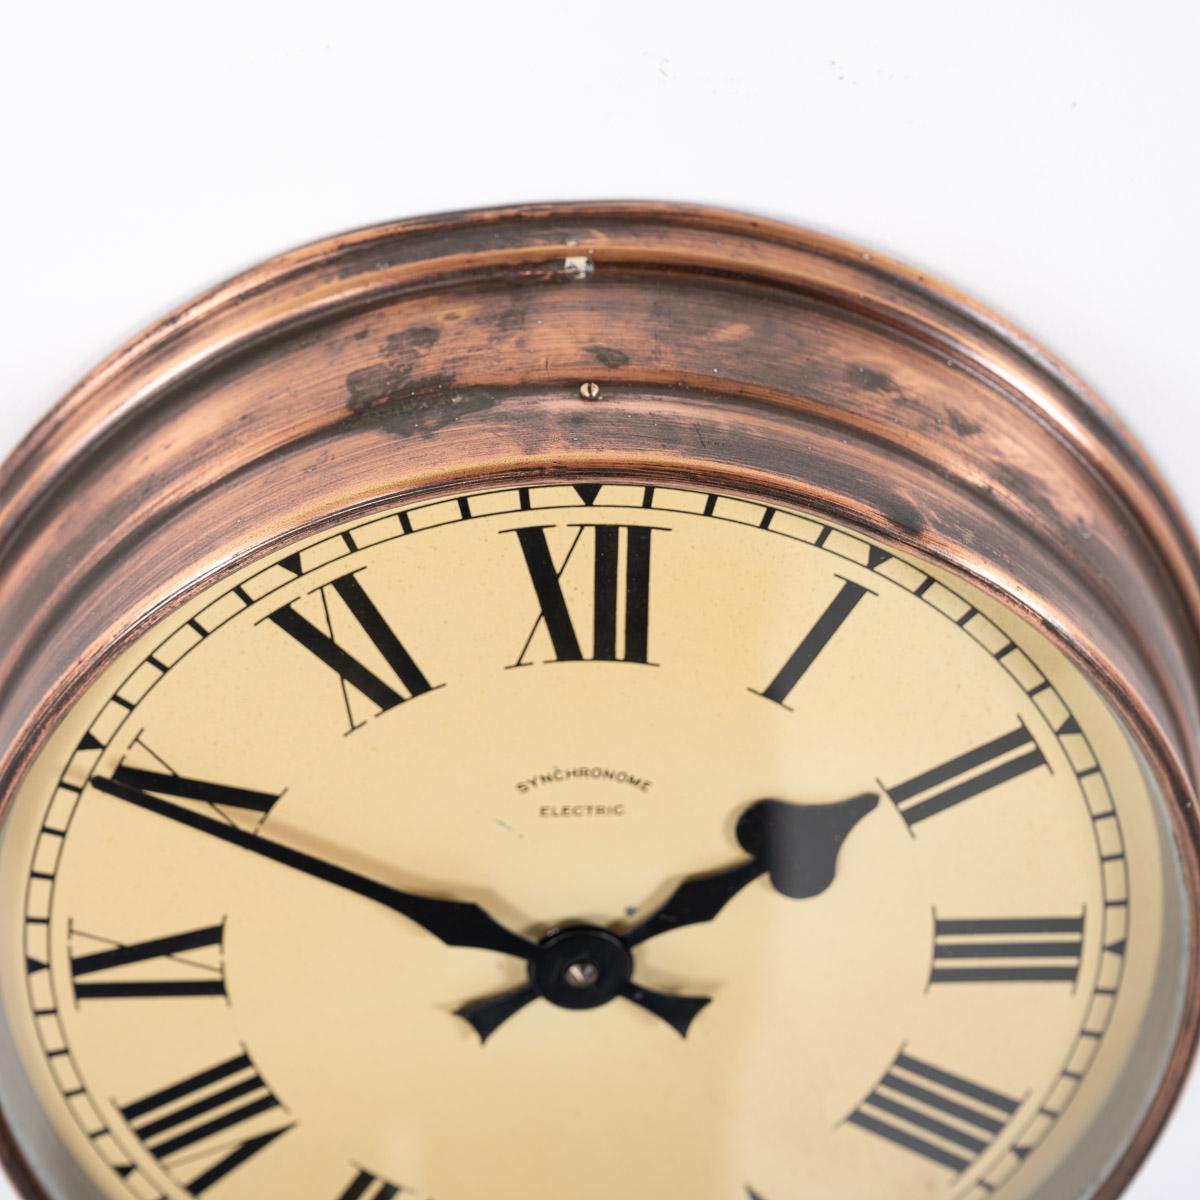 Small Antique Industrial Copper Wall Clock by Synchronome 5